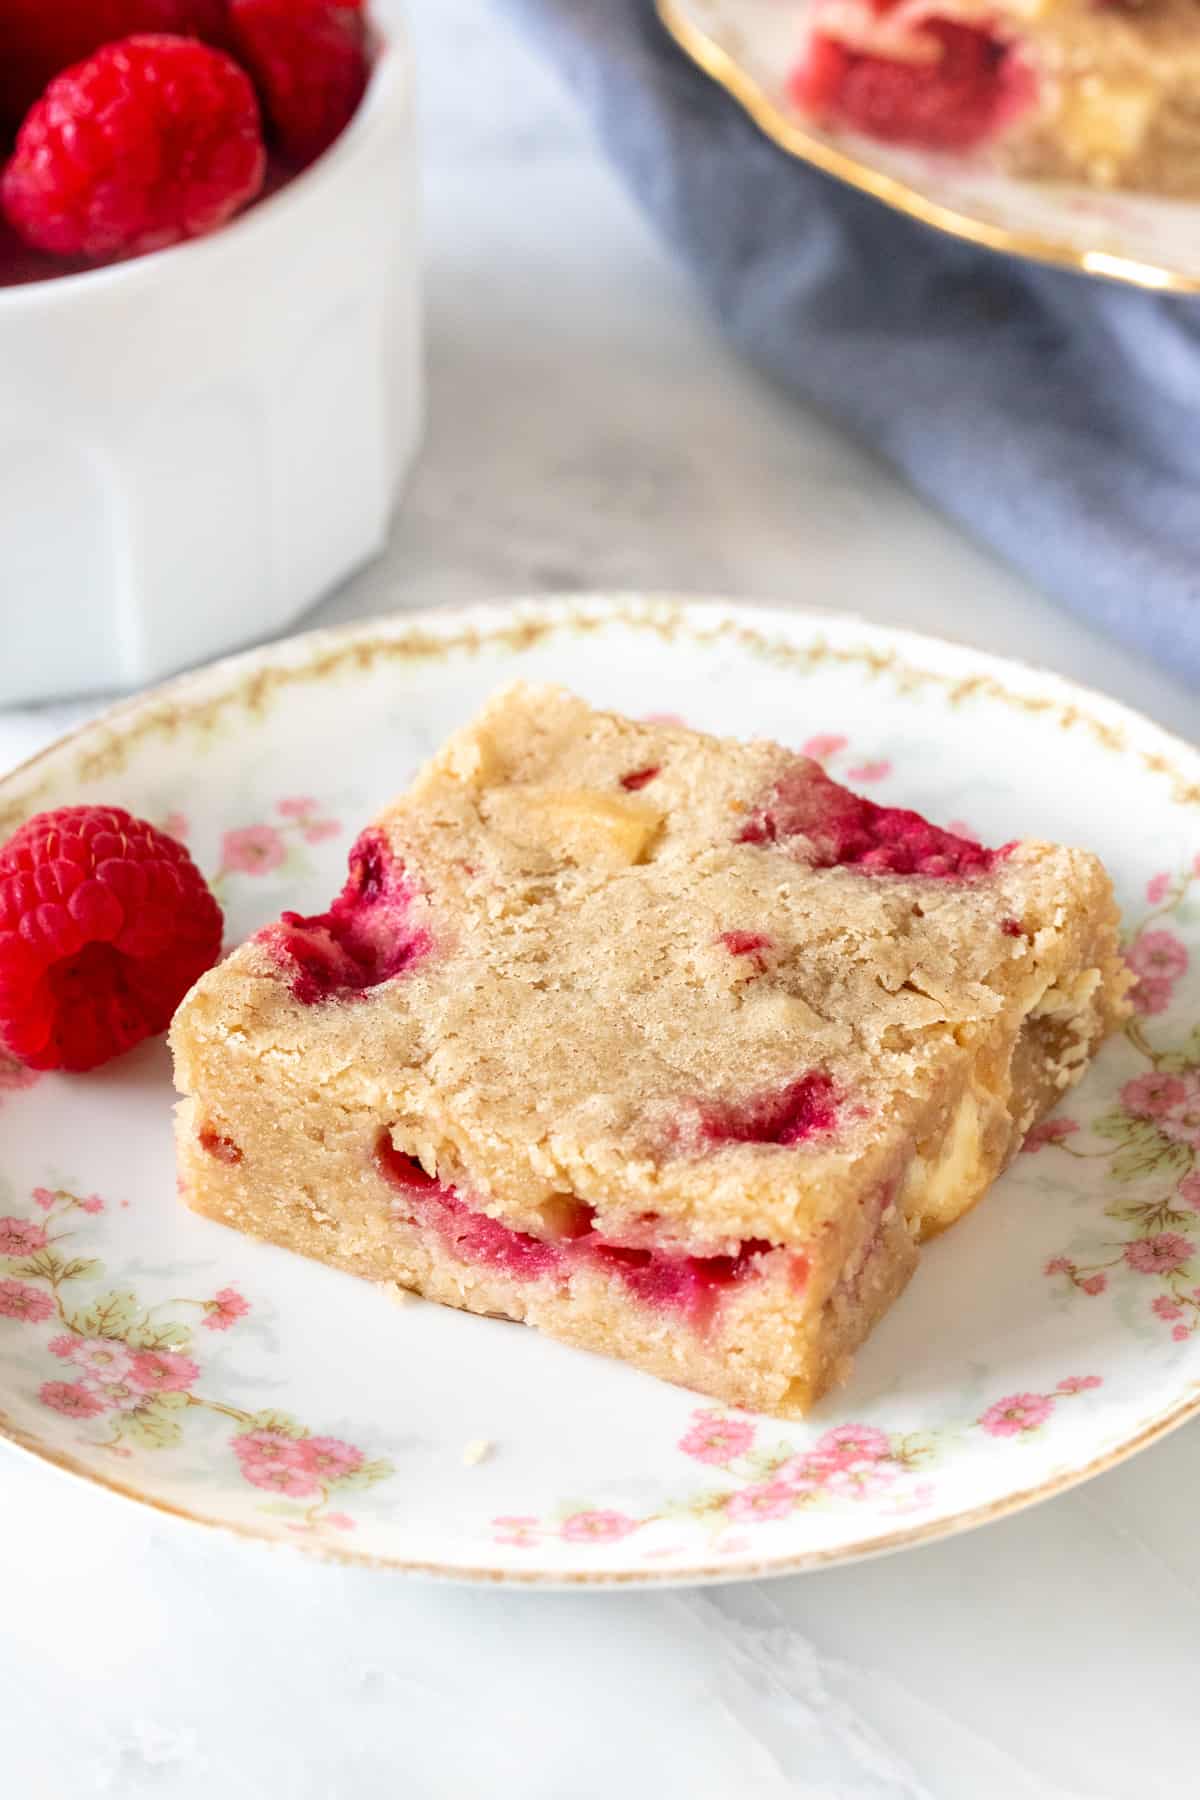 Blondie made with raspberries and white chocolate chunks on a plate